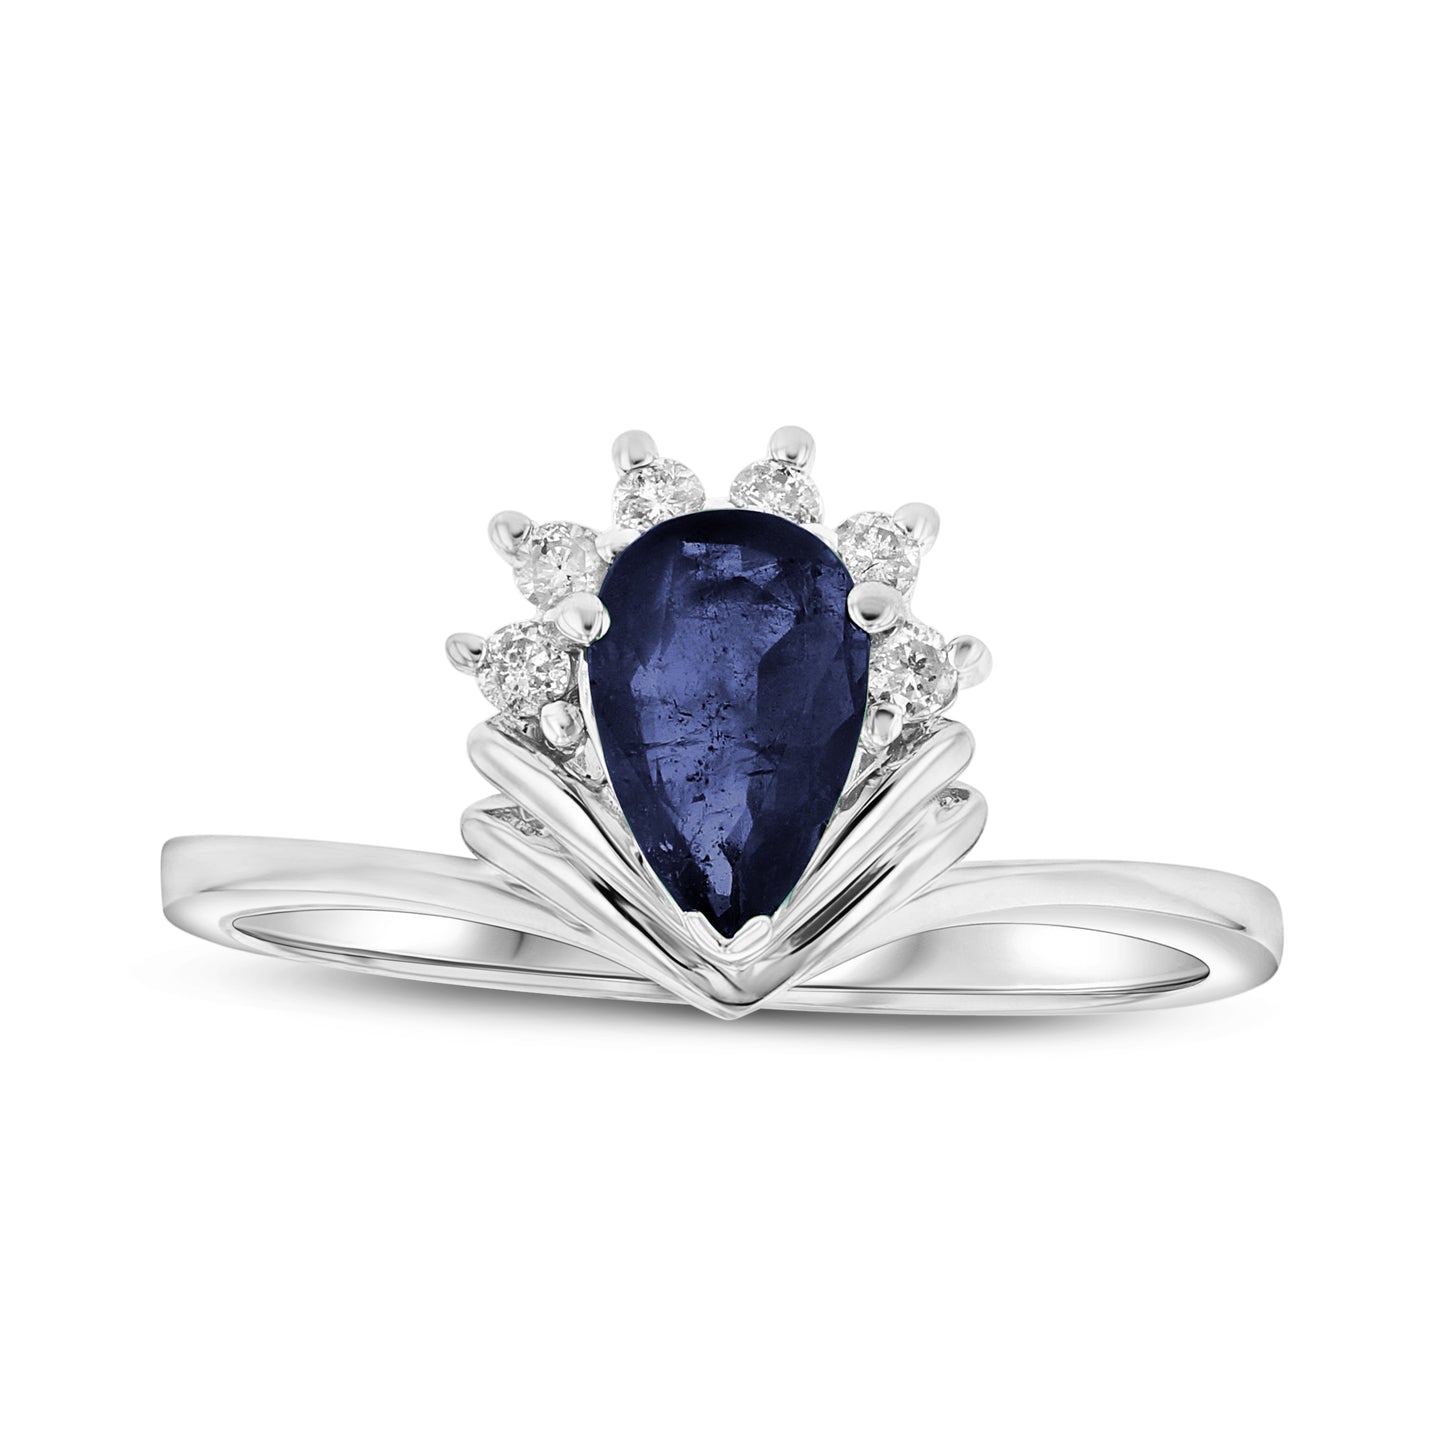 6/7ct Blue Sapphire & Dimaond Ring in 14k White Gold